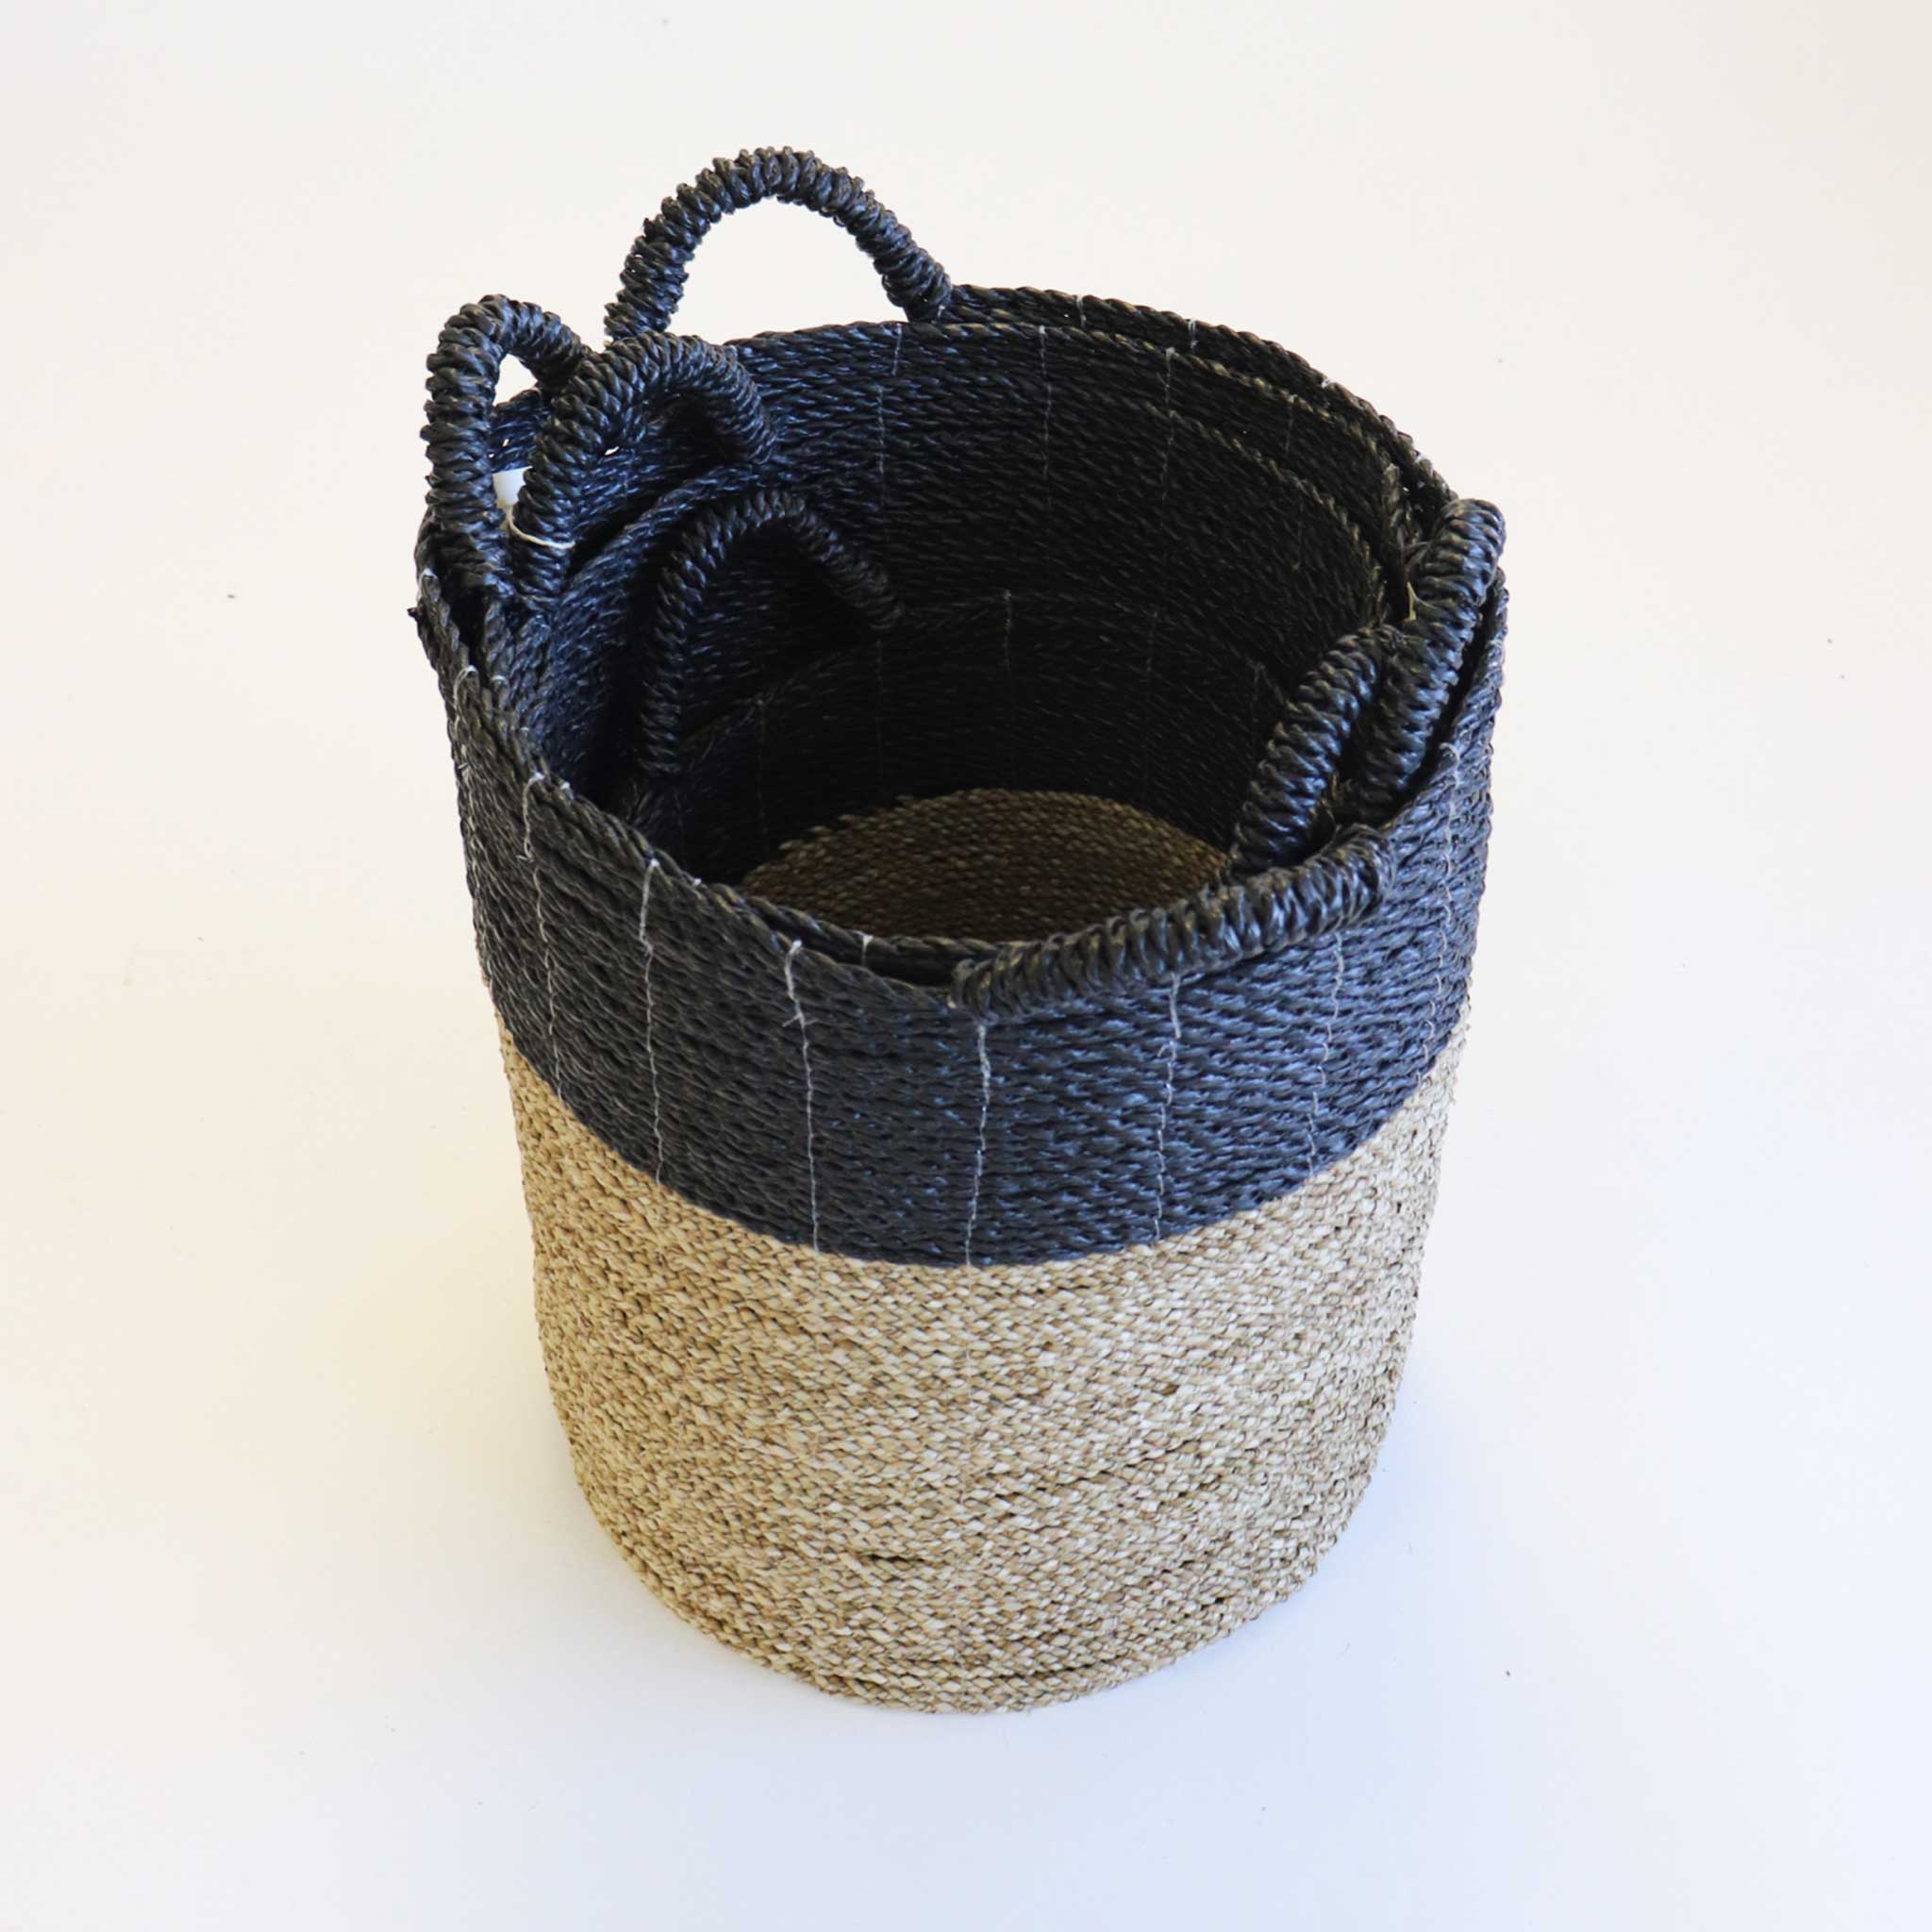 Black and Natural Woven Baskets